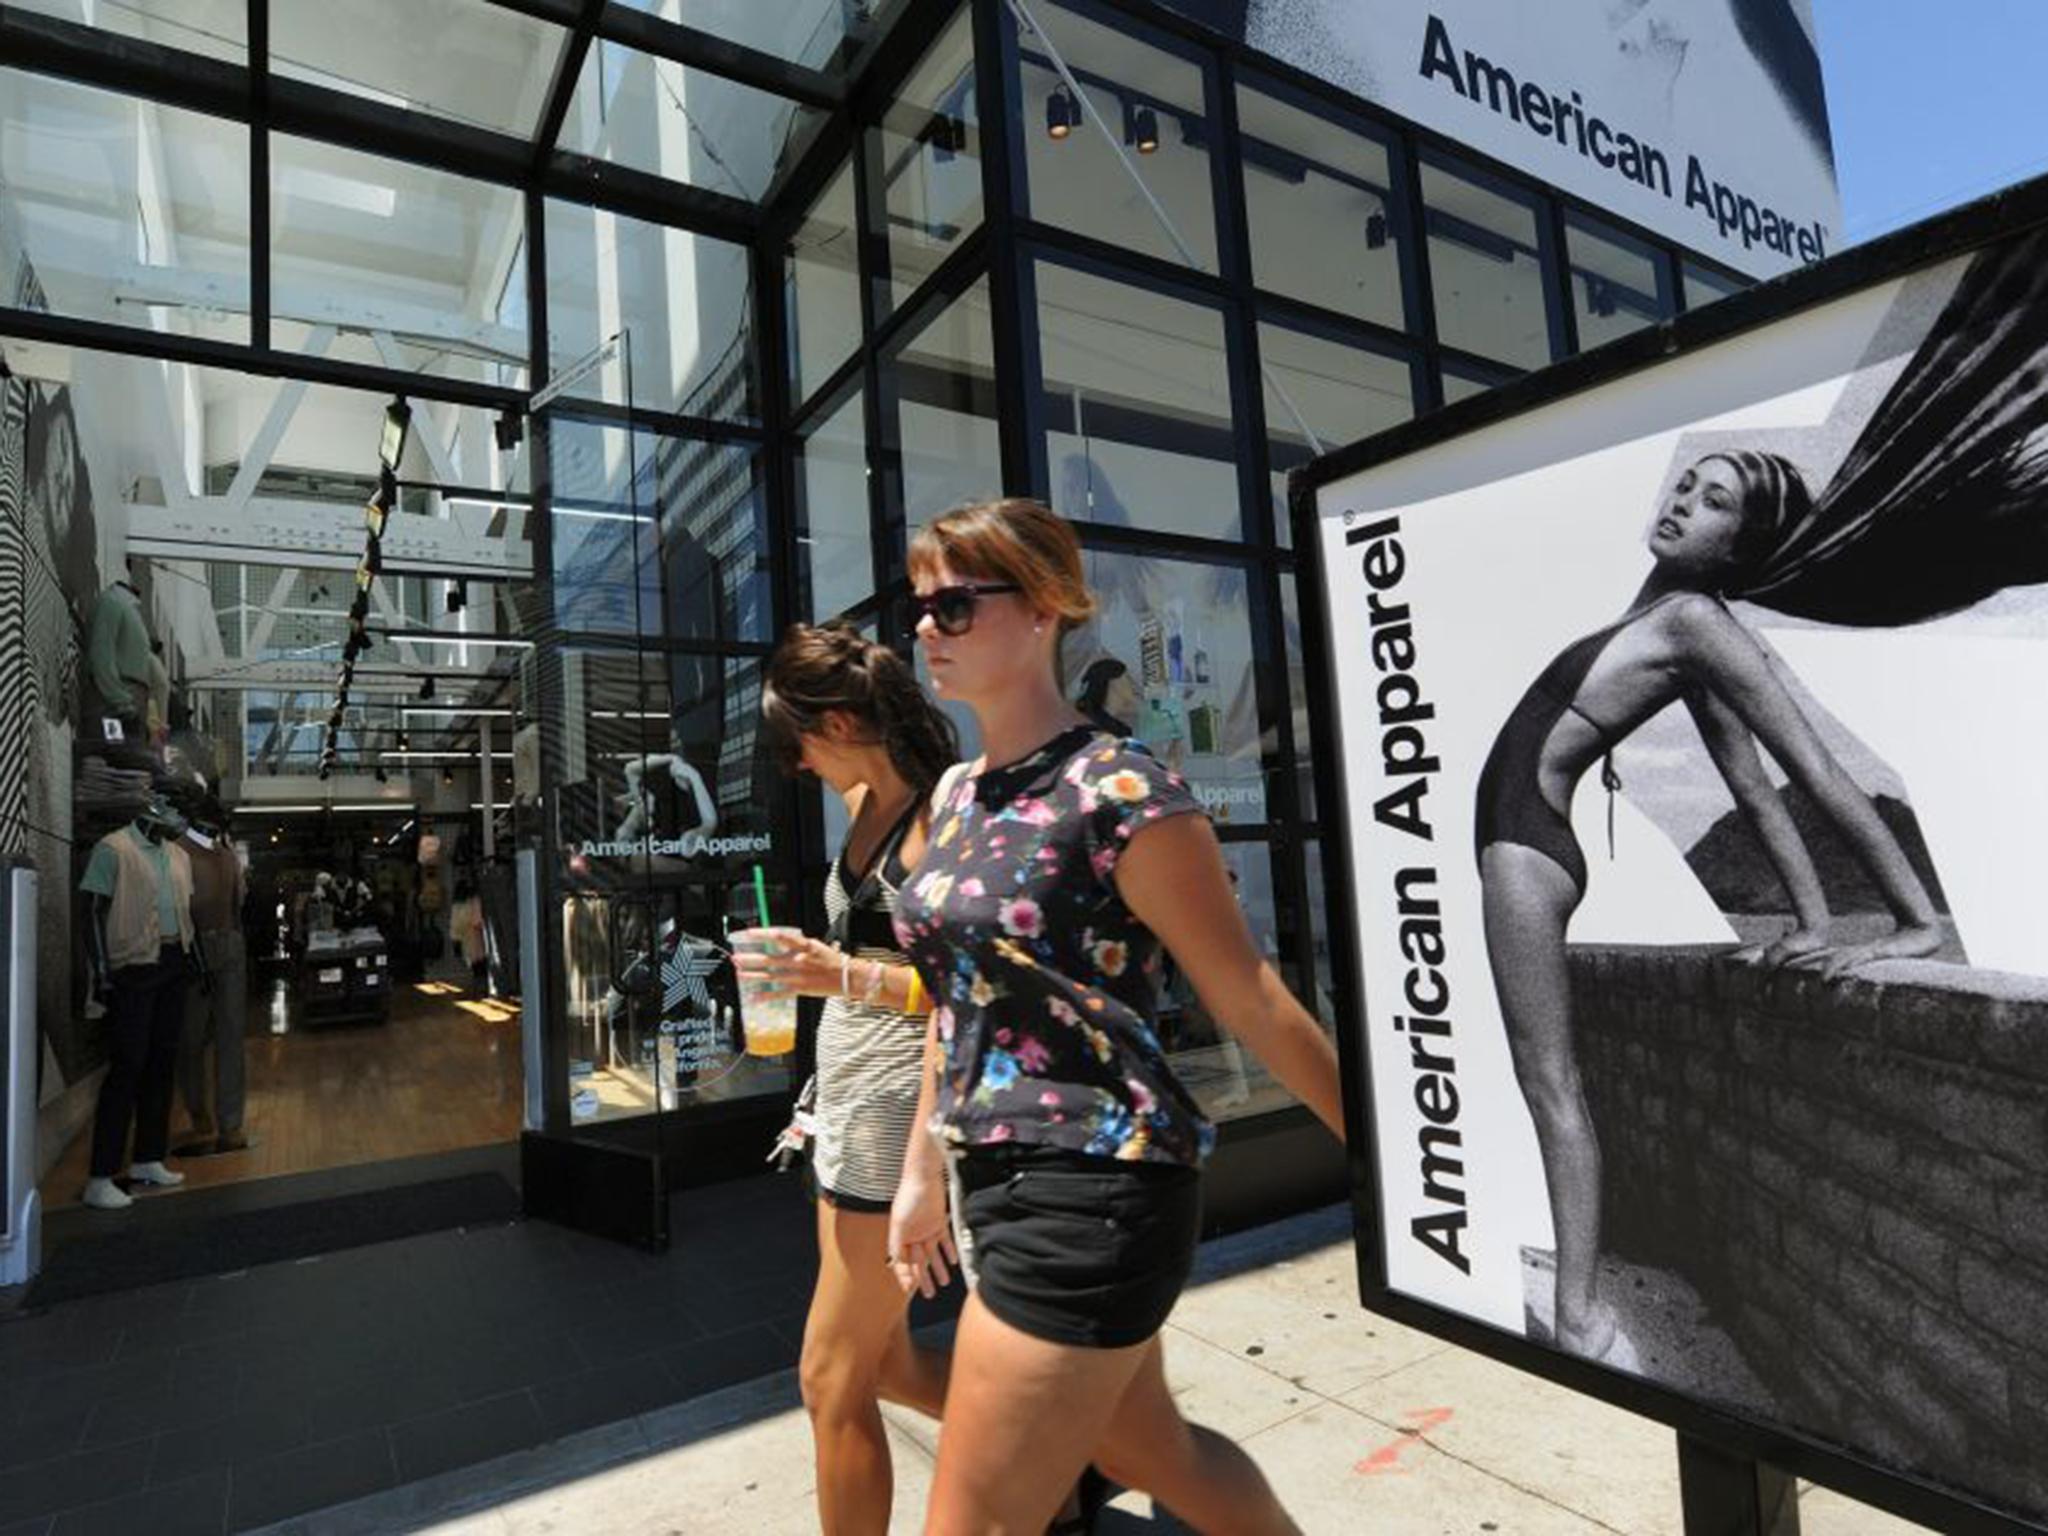 Out of fashion … American Apparel is known for its racy adverts